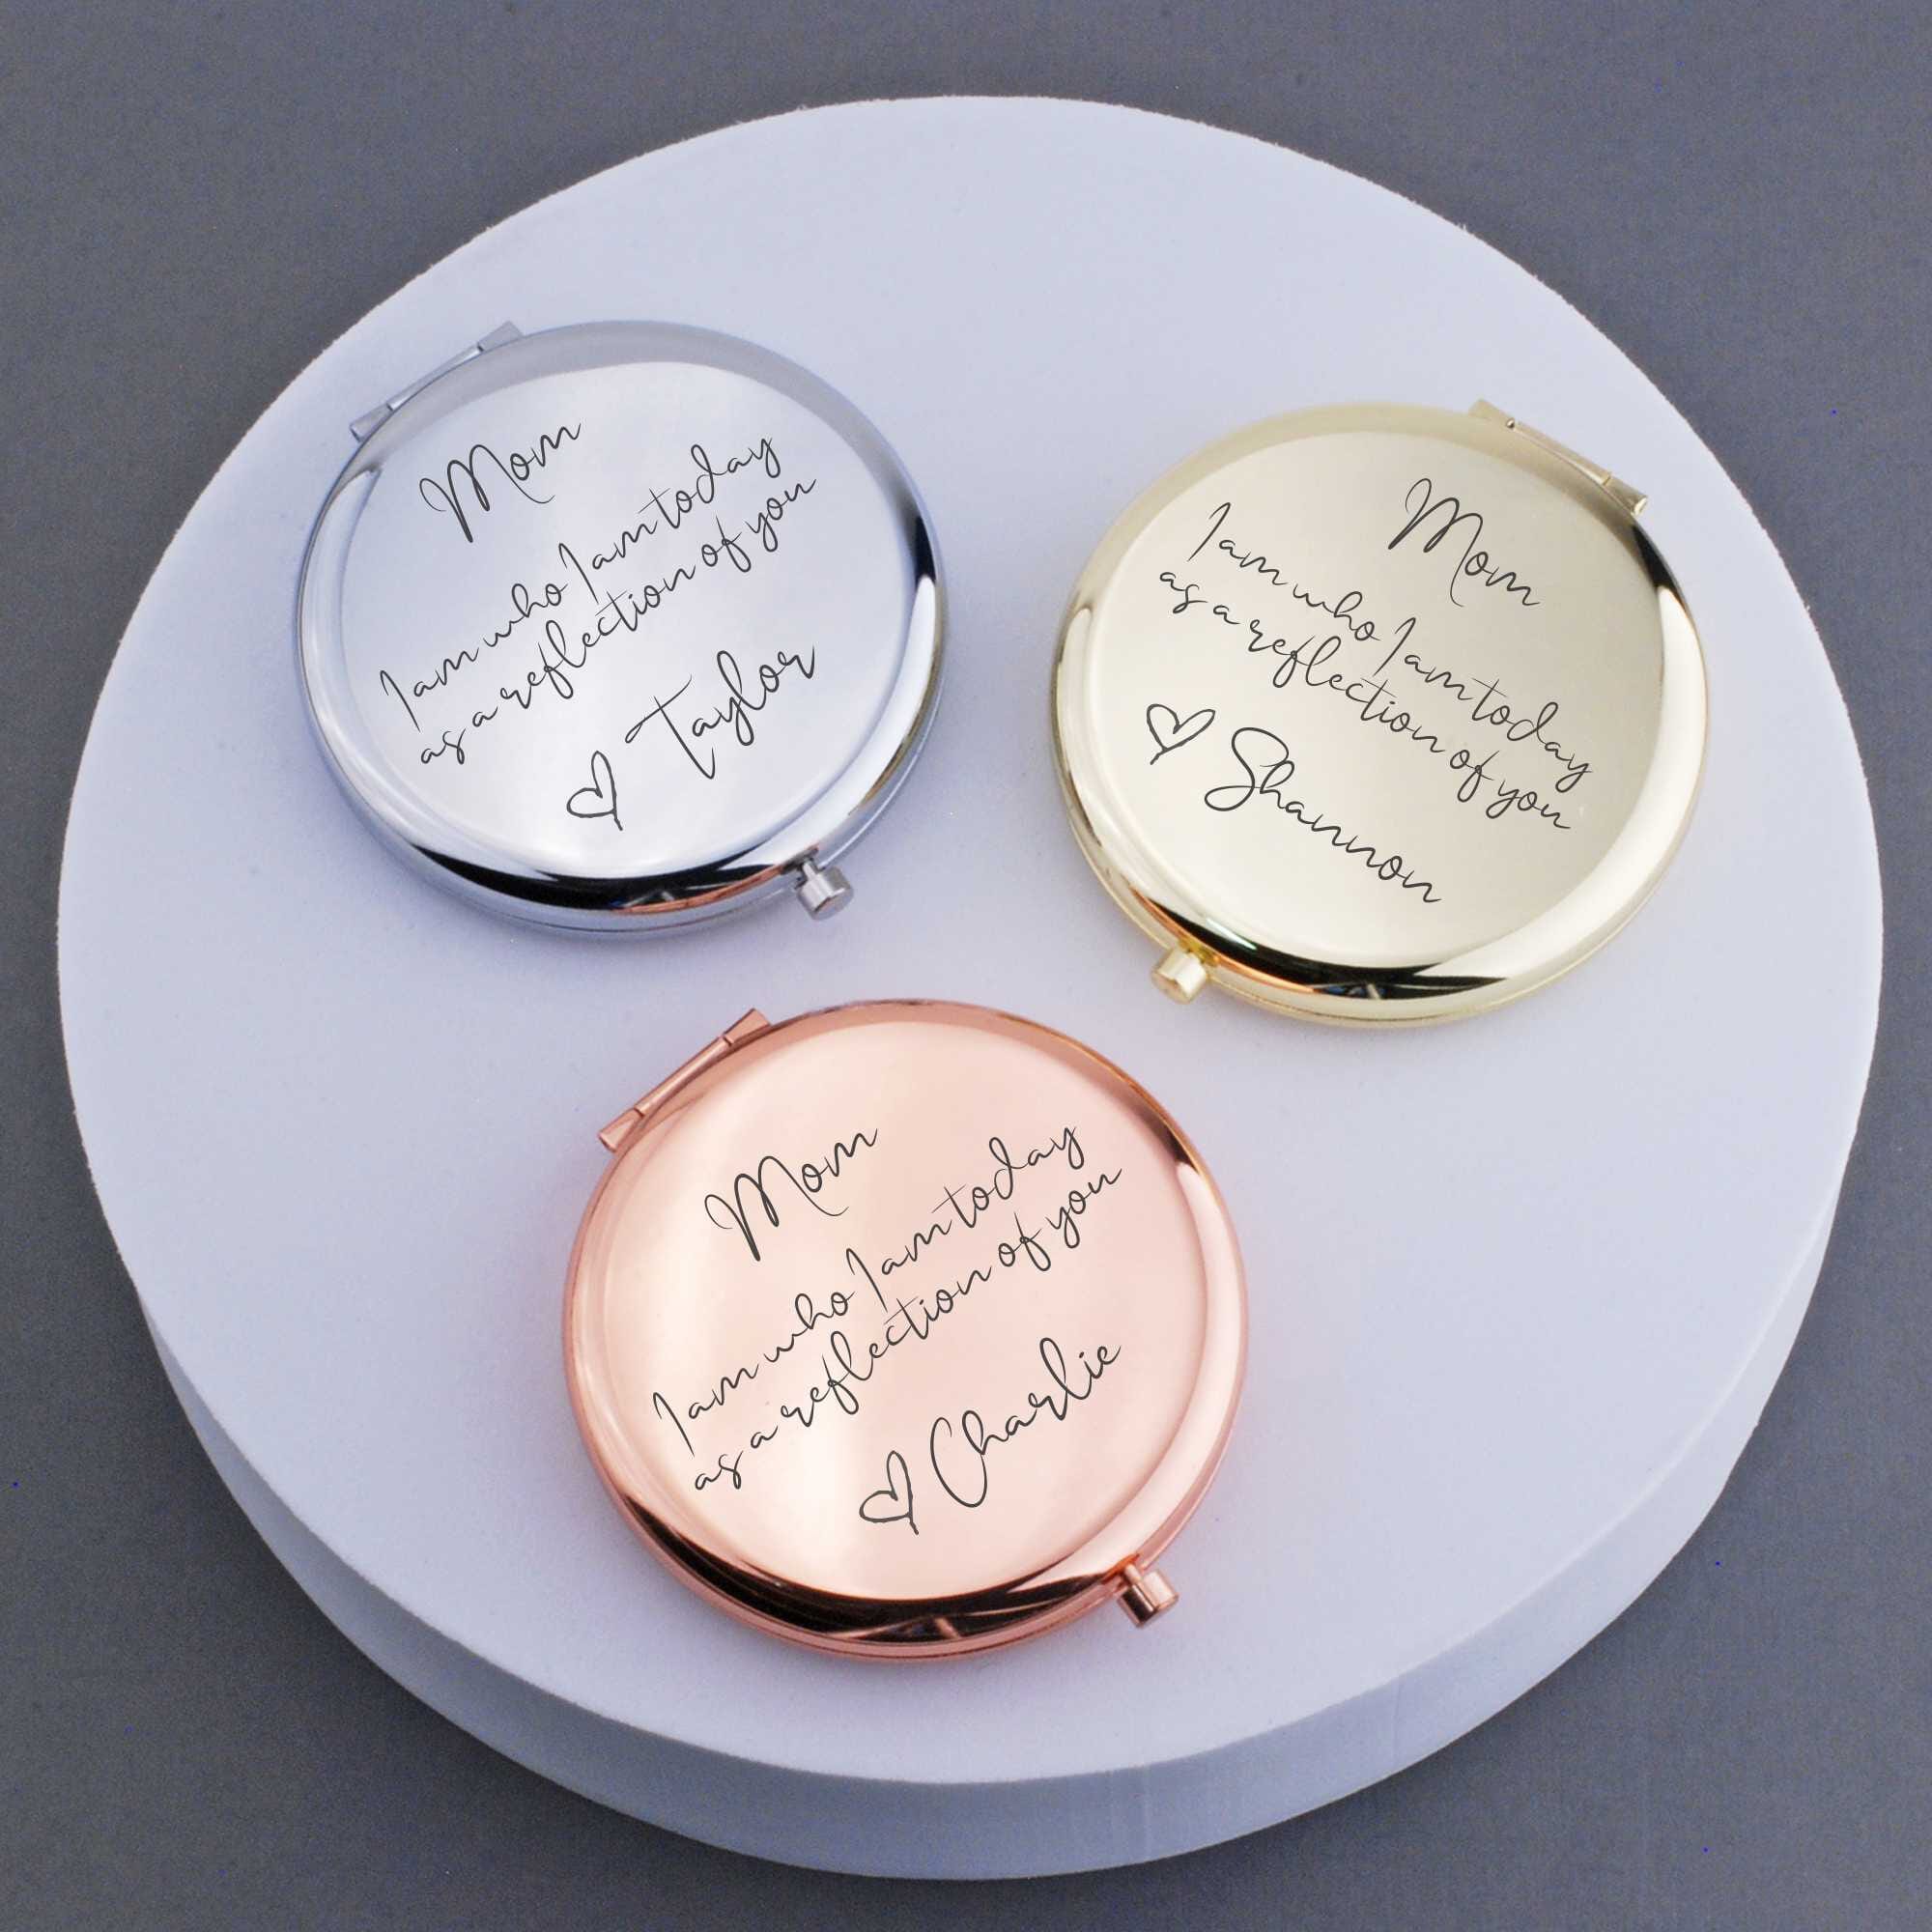 Personalized Compact Mirror Mother of the Bride Gift - The Personal Exchange